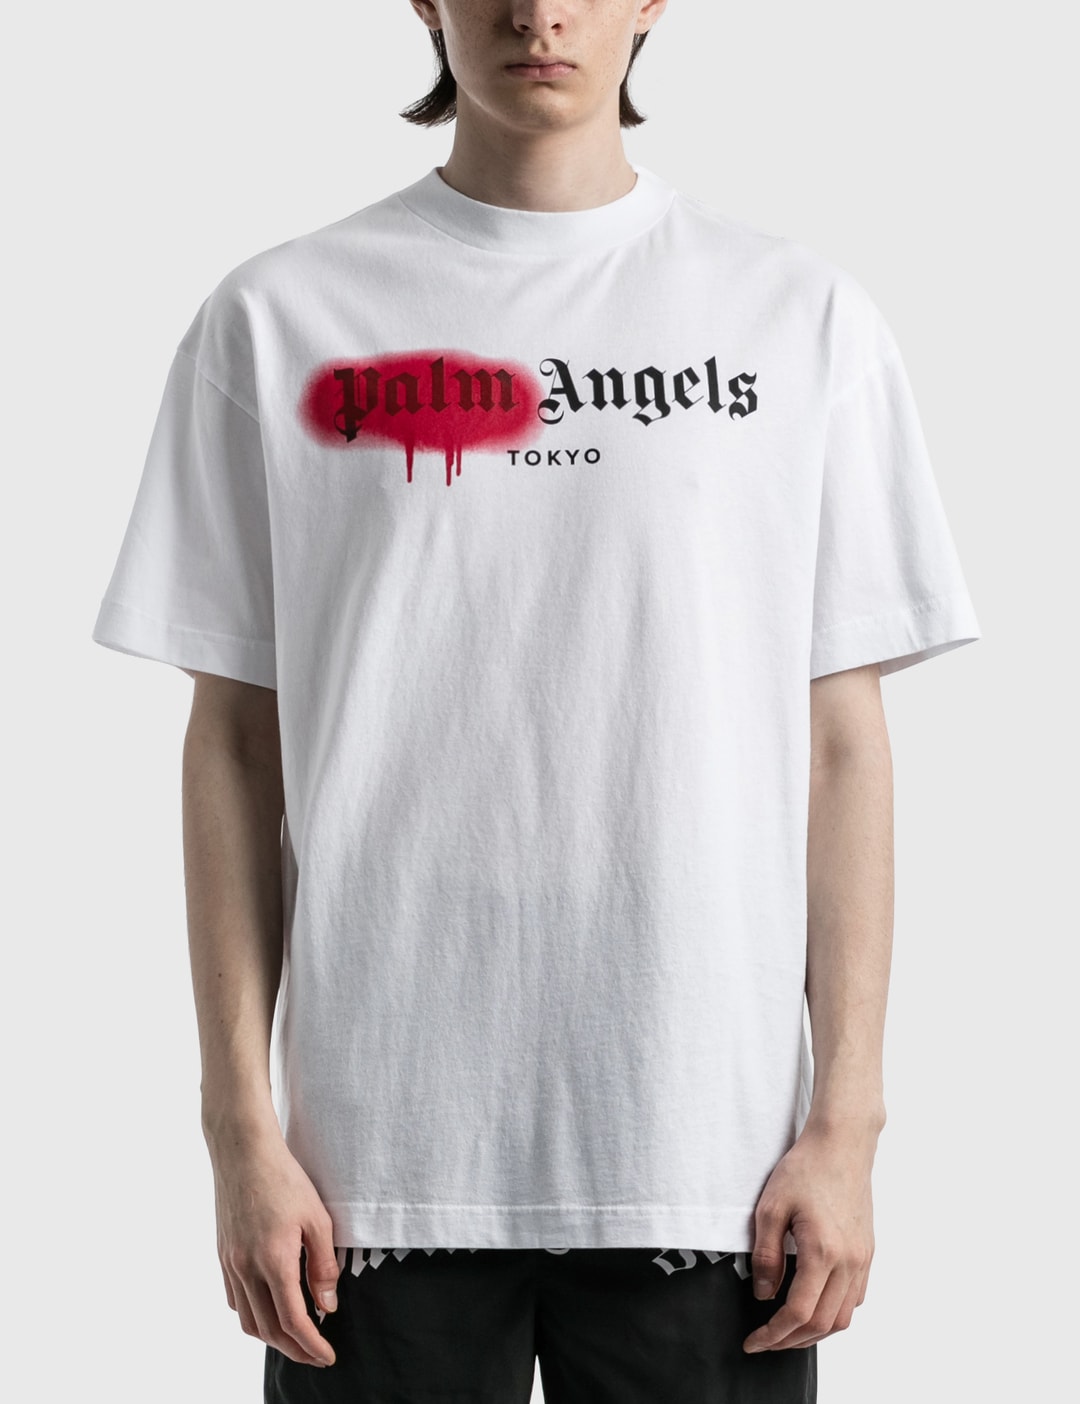 Palm Angels - Tokyo Sprayed T-shirt | HBX - Globally Curated Fashion ...